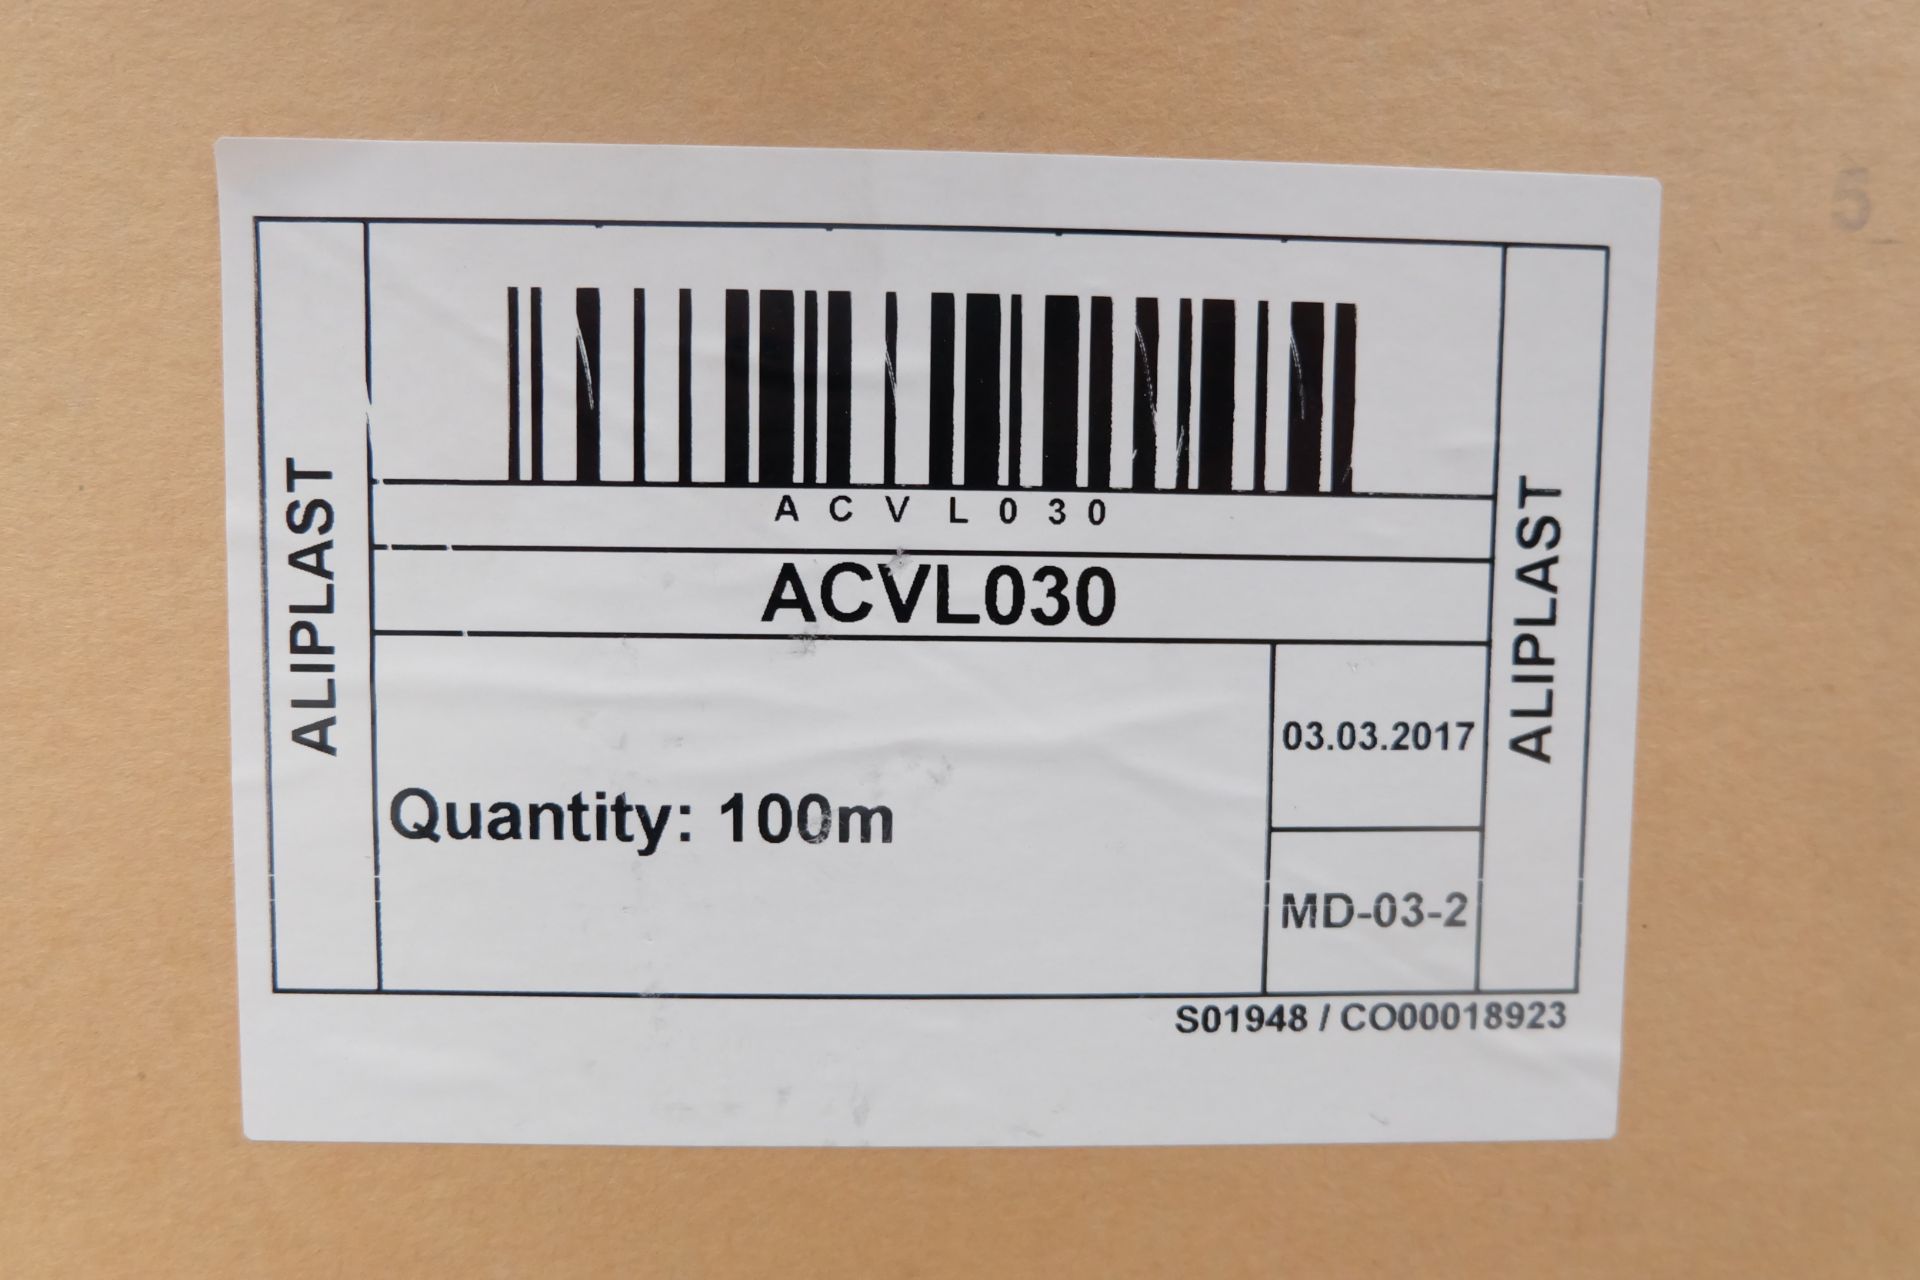 Smart Architectural Aluminium Ltd. Central Gasket Item No. ACVL 030. 10 x Coils of 100 Mtrs. - Image 2 of 4